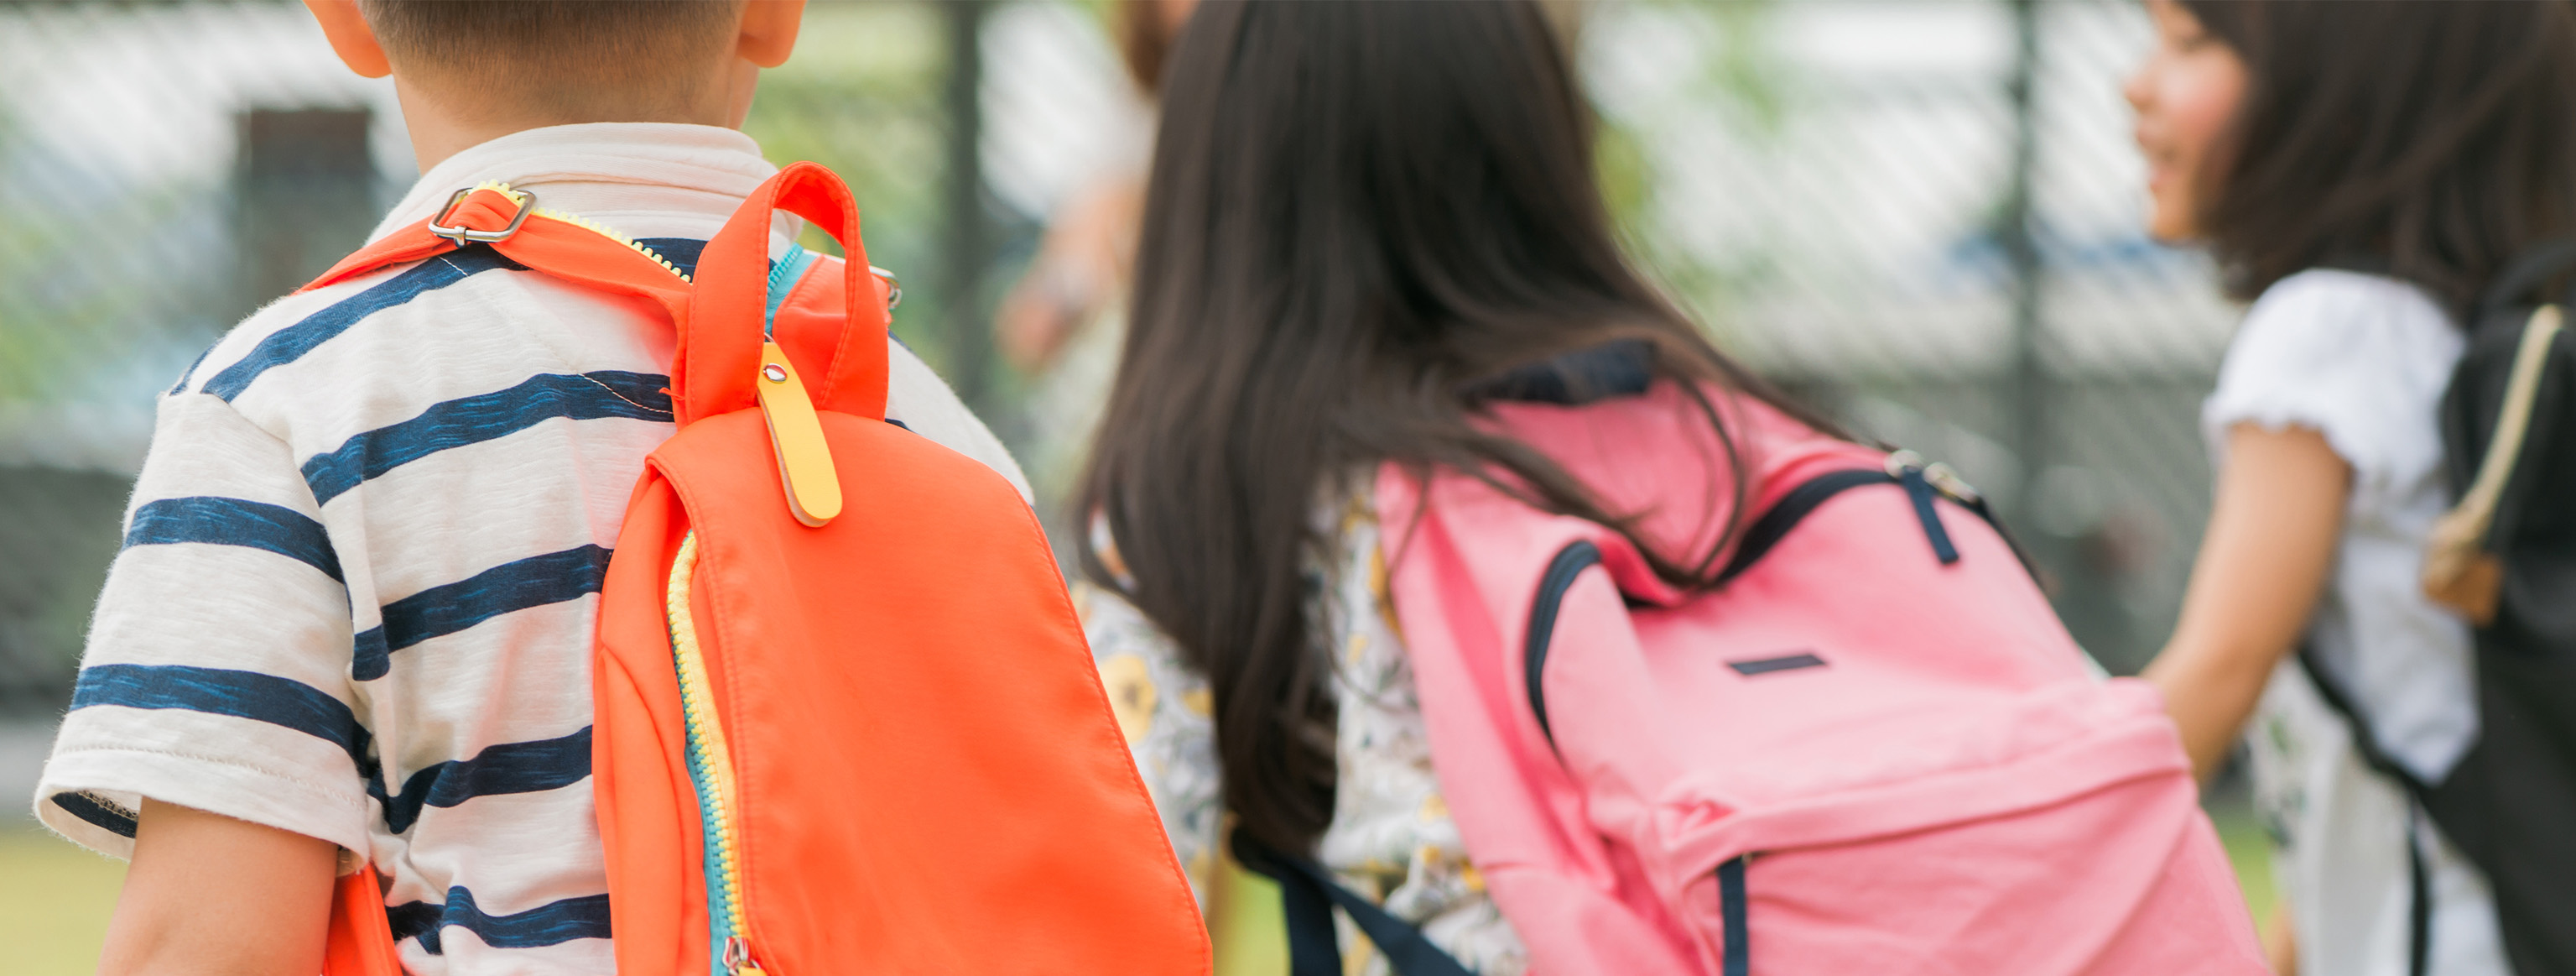 5 Shocking Facts about School Backpacks